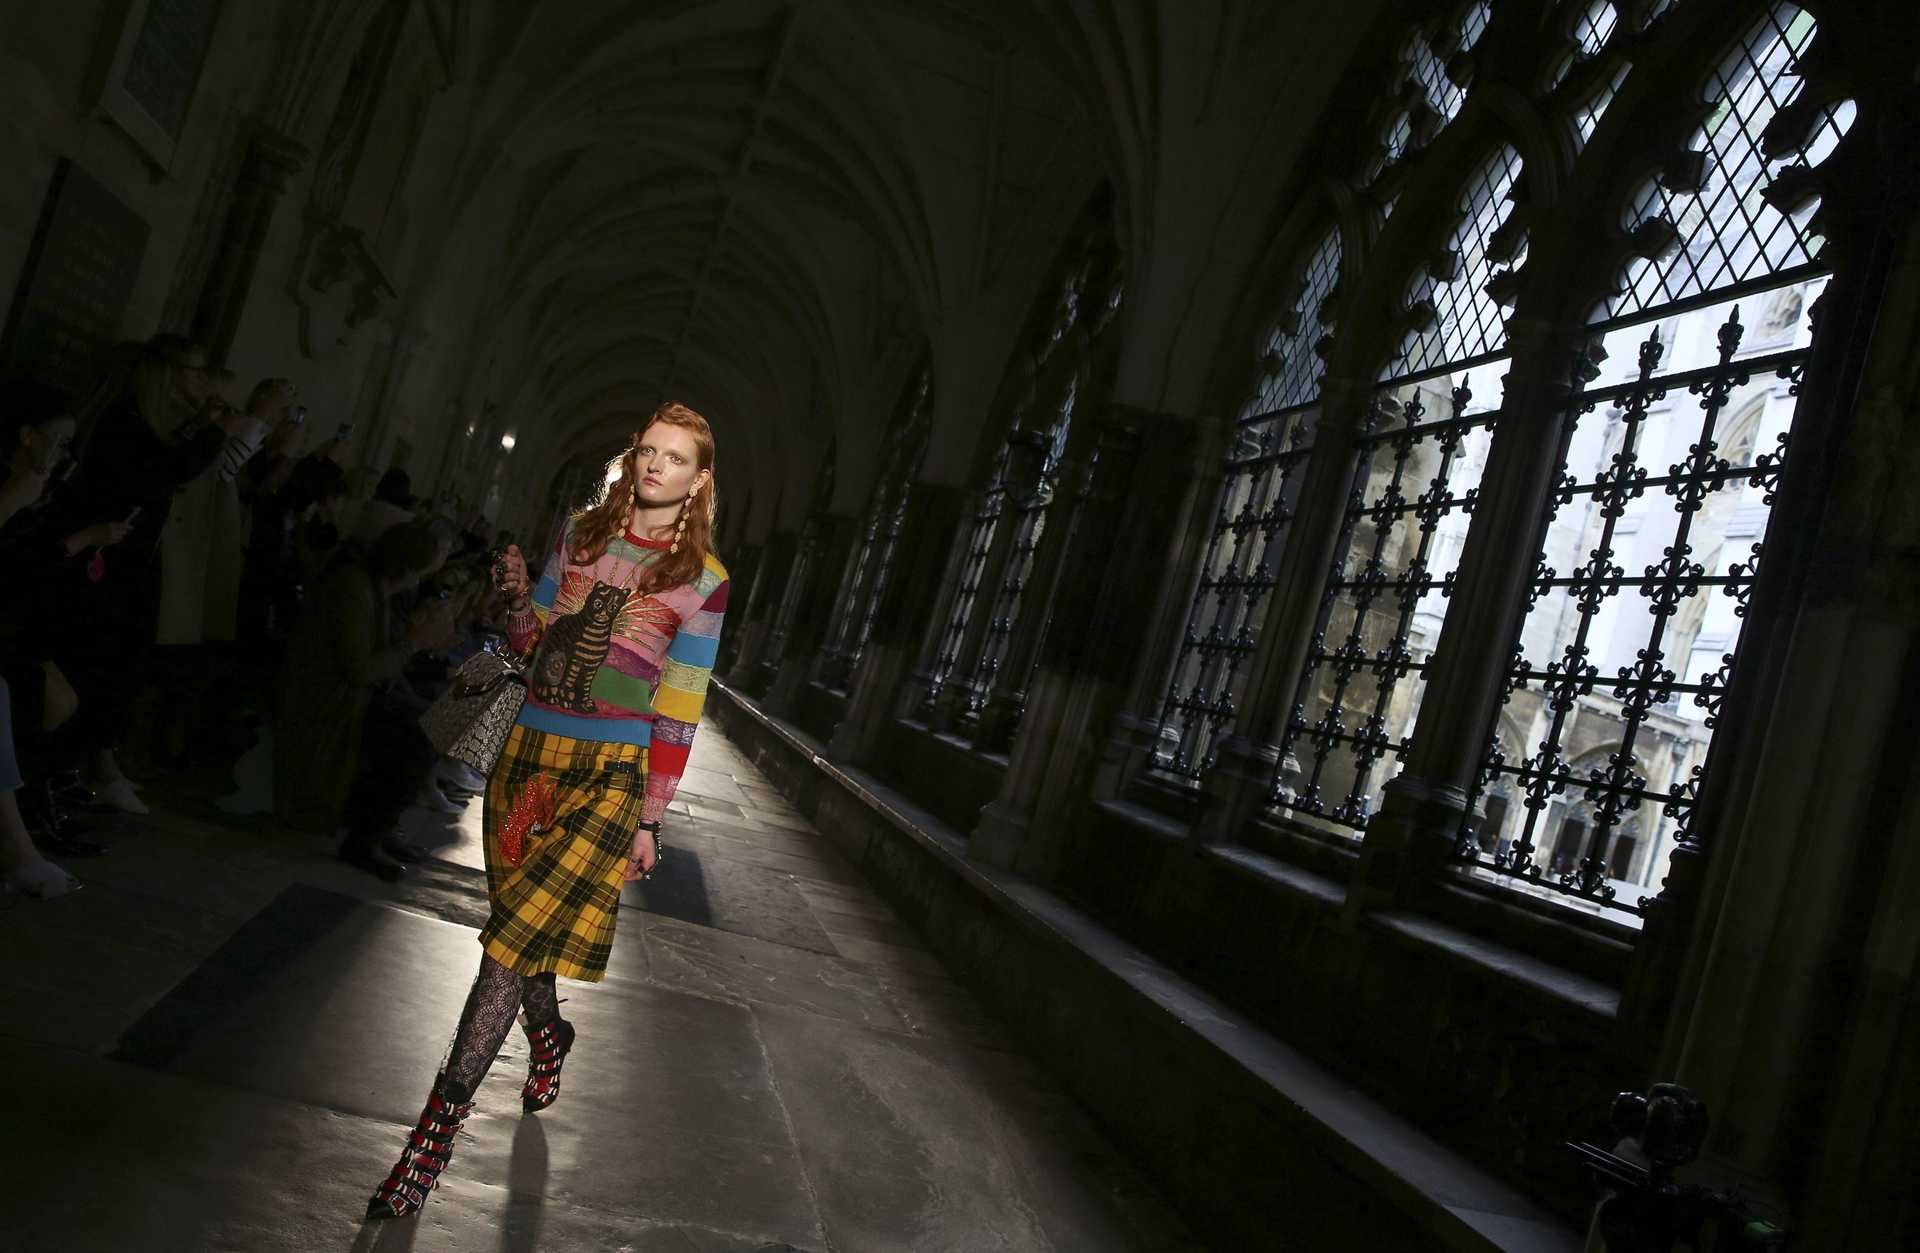 A model present a creation by Gucci at a catwalk show in the cloisters of Westminster Abbey in London